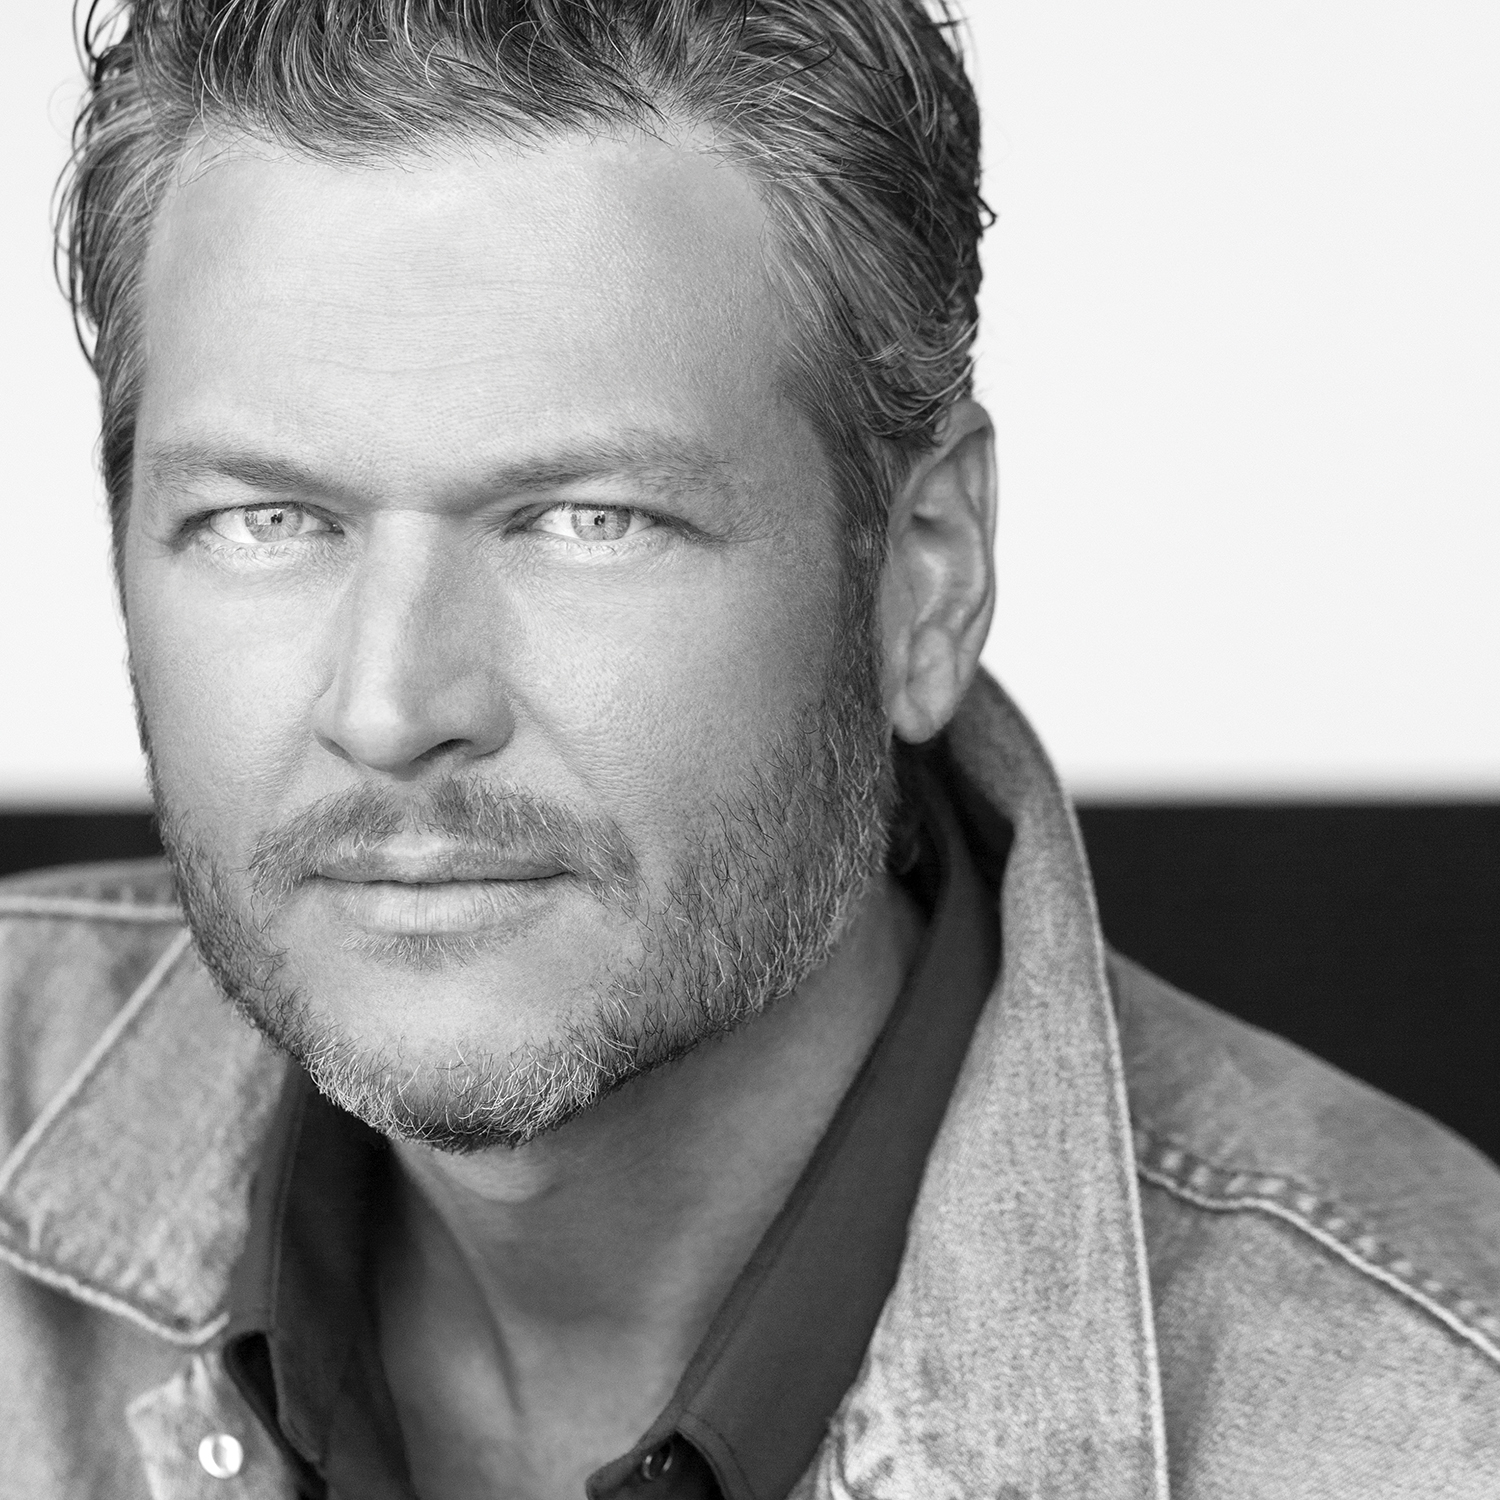 BLAKE SHELTON ADDS VOICE TEAM MEMBER AND CHAMPION SUNDANCE HEAD TO